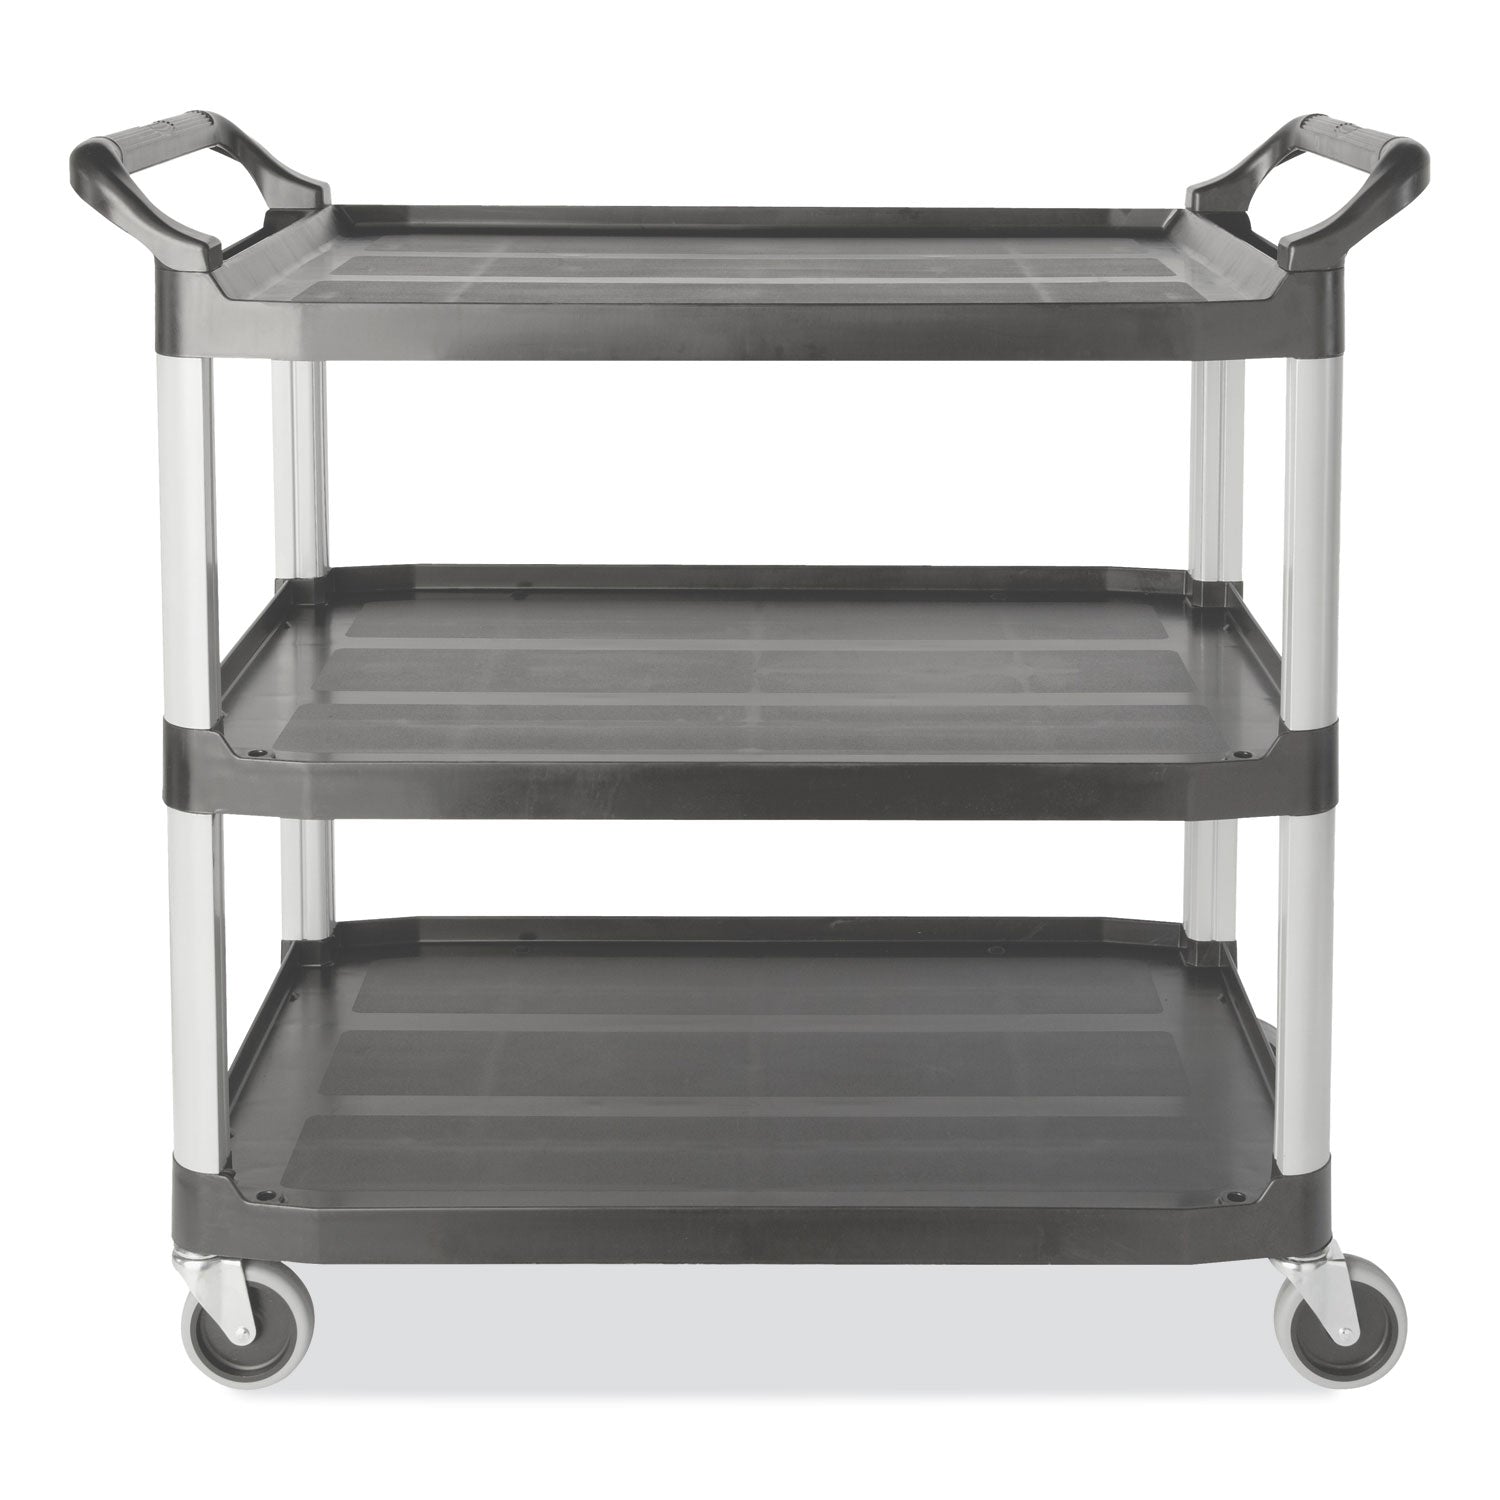 xtra-utility-cart-with-open-sides-plastic-3-shelves-300-lb-capacity-20-x-4063-x-378-gray_rcp4091gra - 1